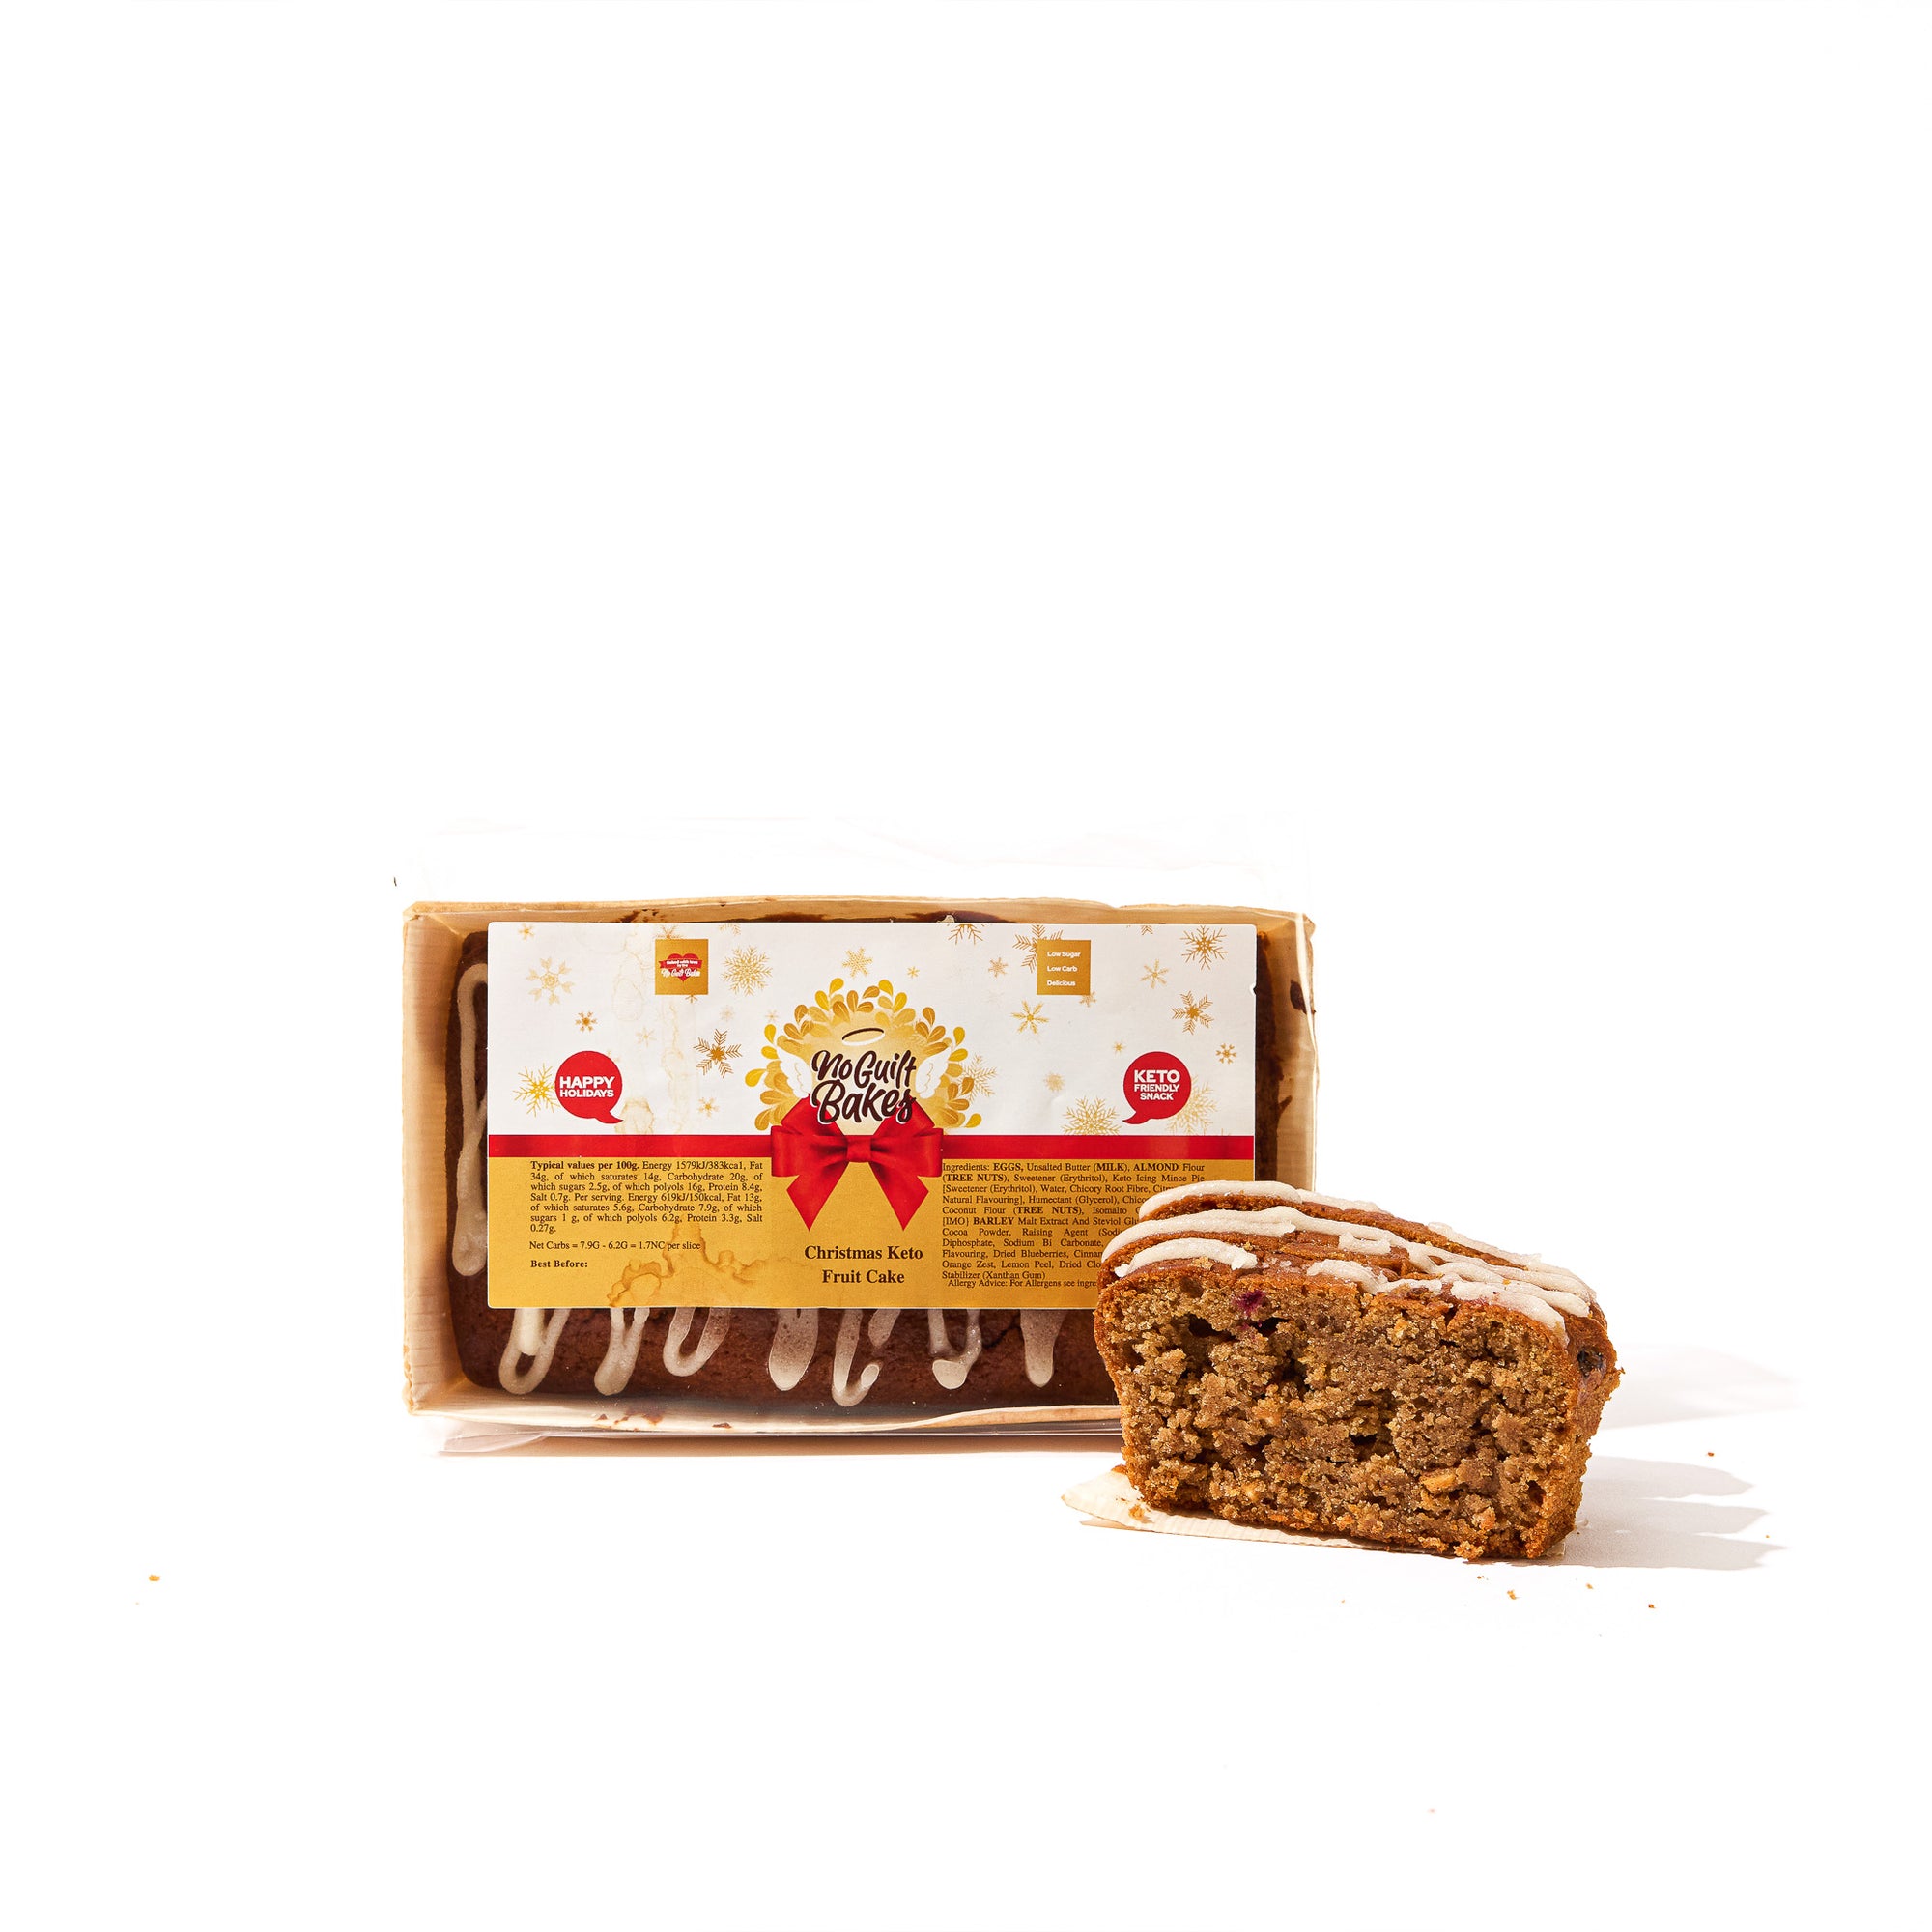 A piece of Low Carb Fruit Loaf Cake - Gluten Free, a popular Christmas treat by No Guilt Bakes, is sitting next to a box.